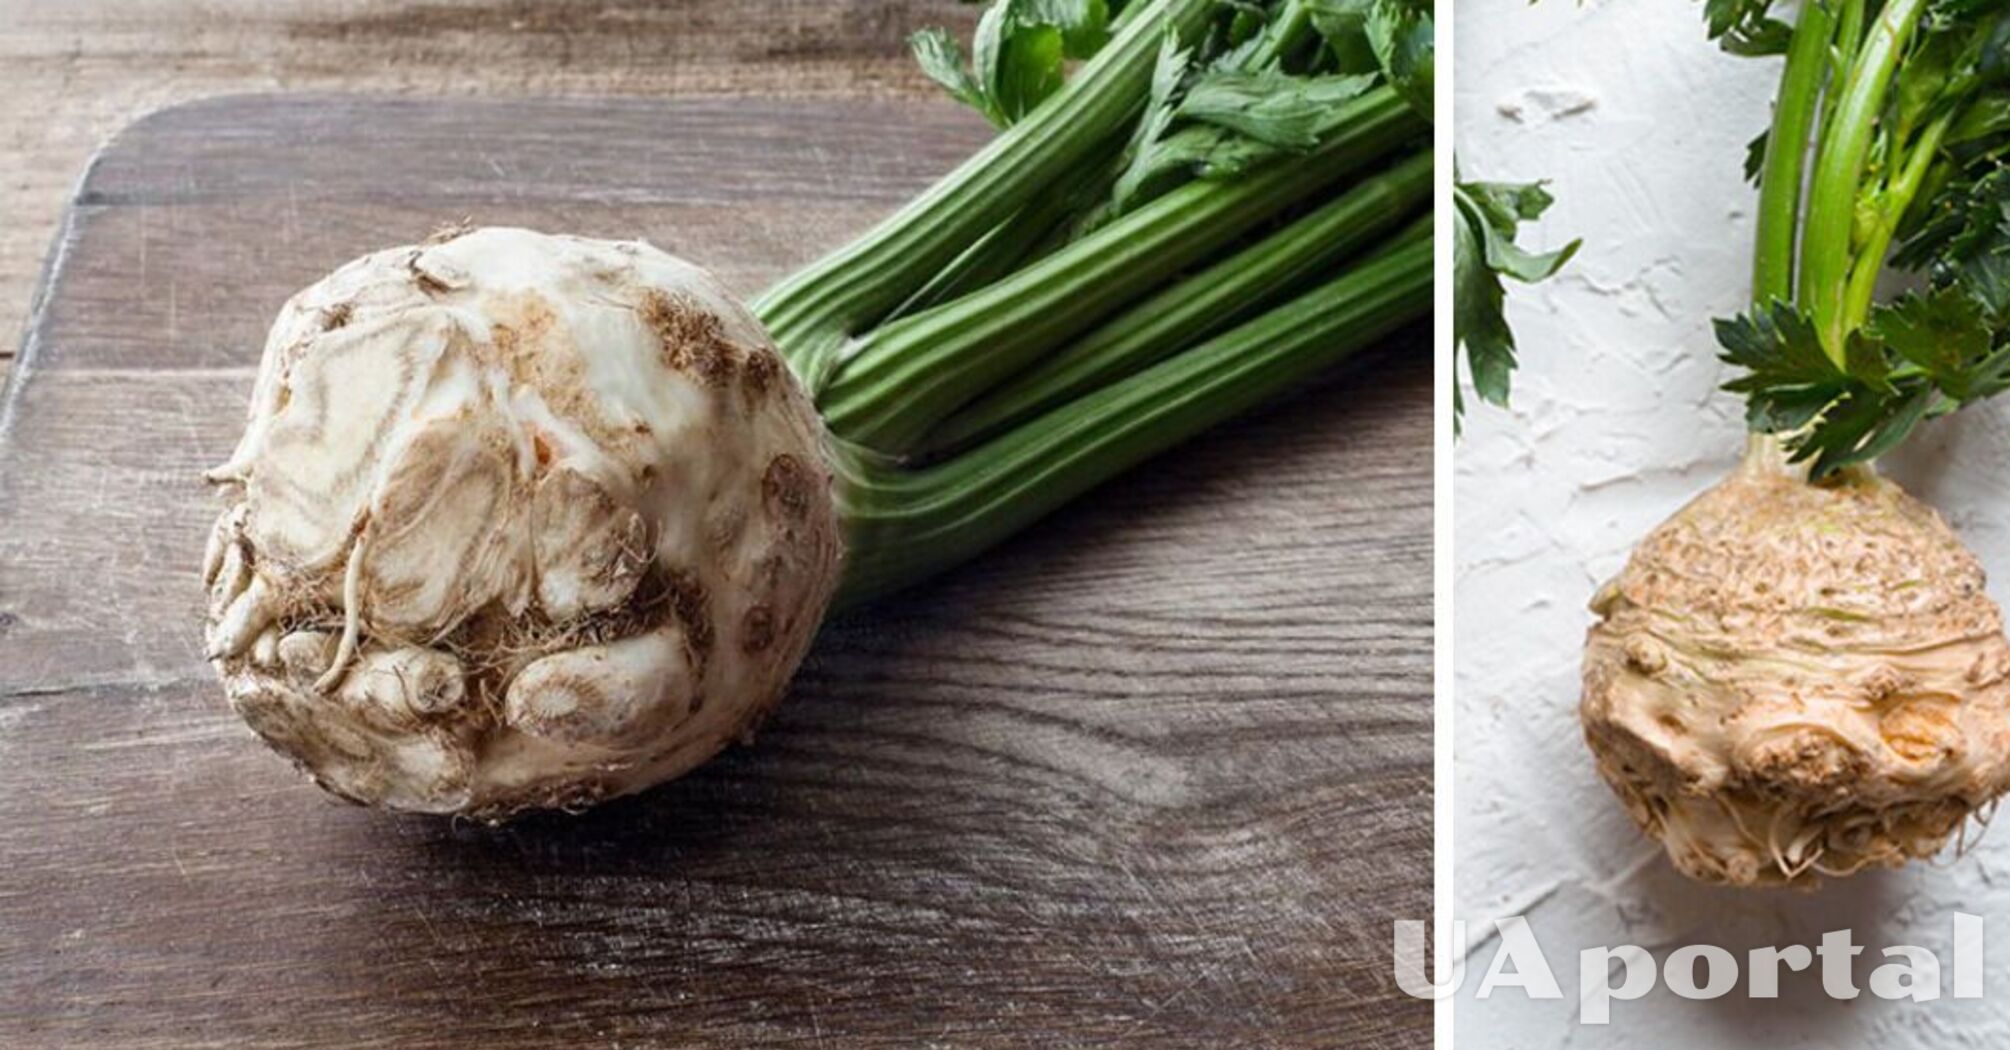 Can you eat celery root regularly